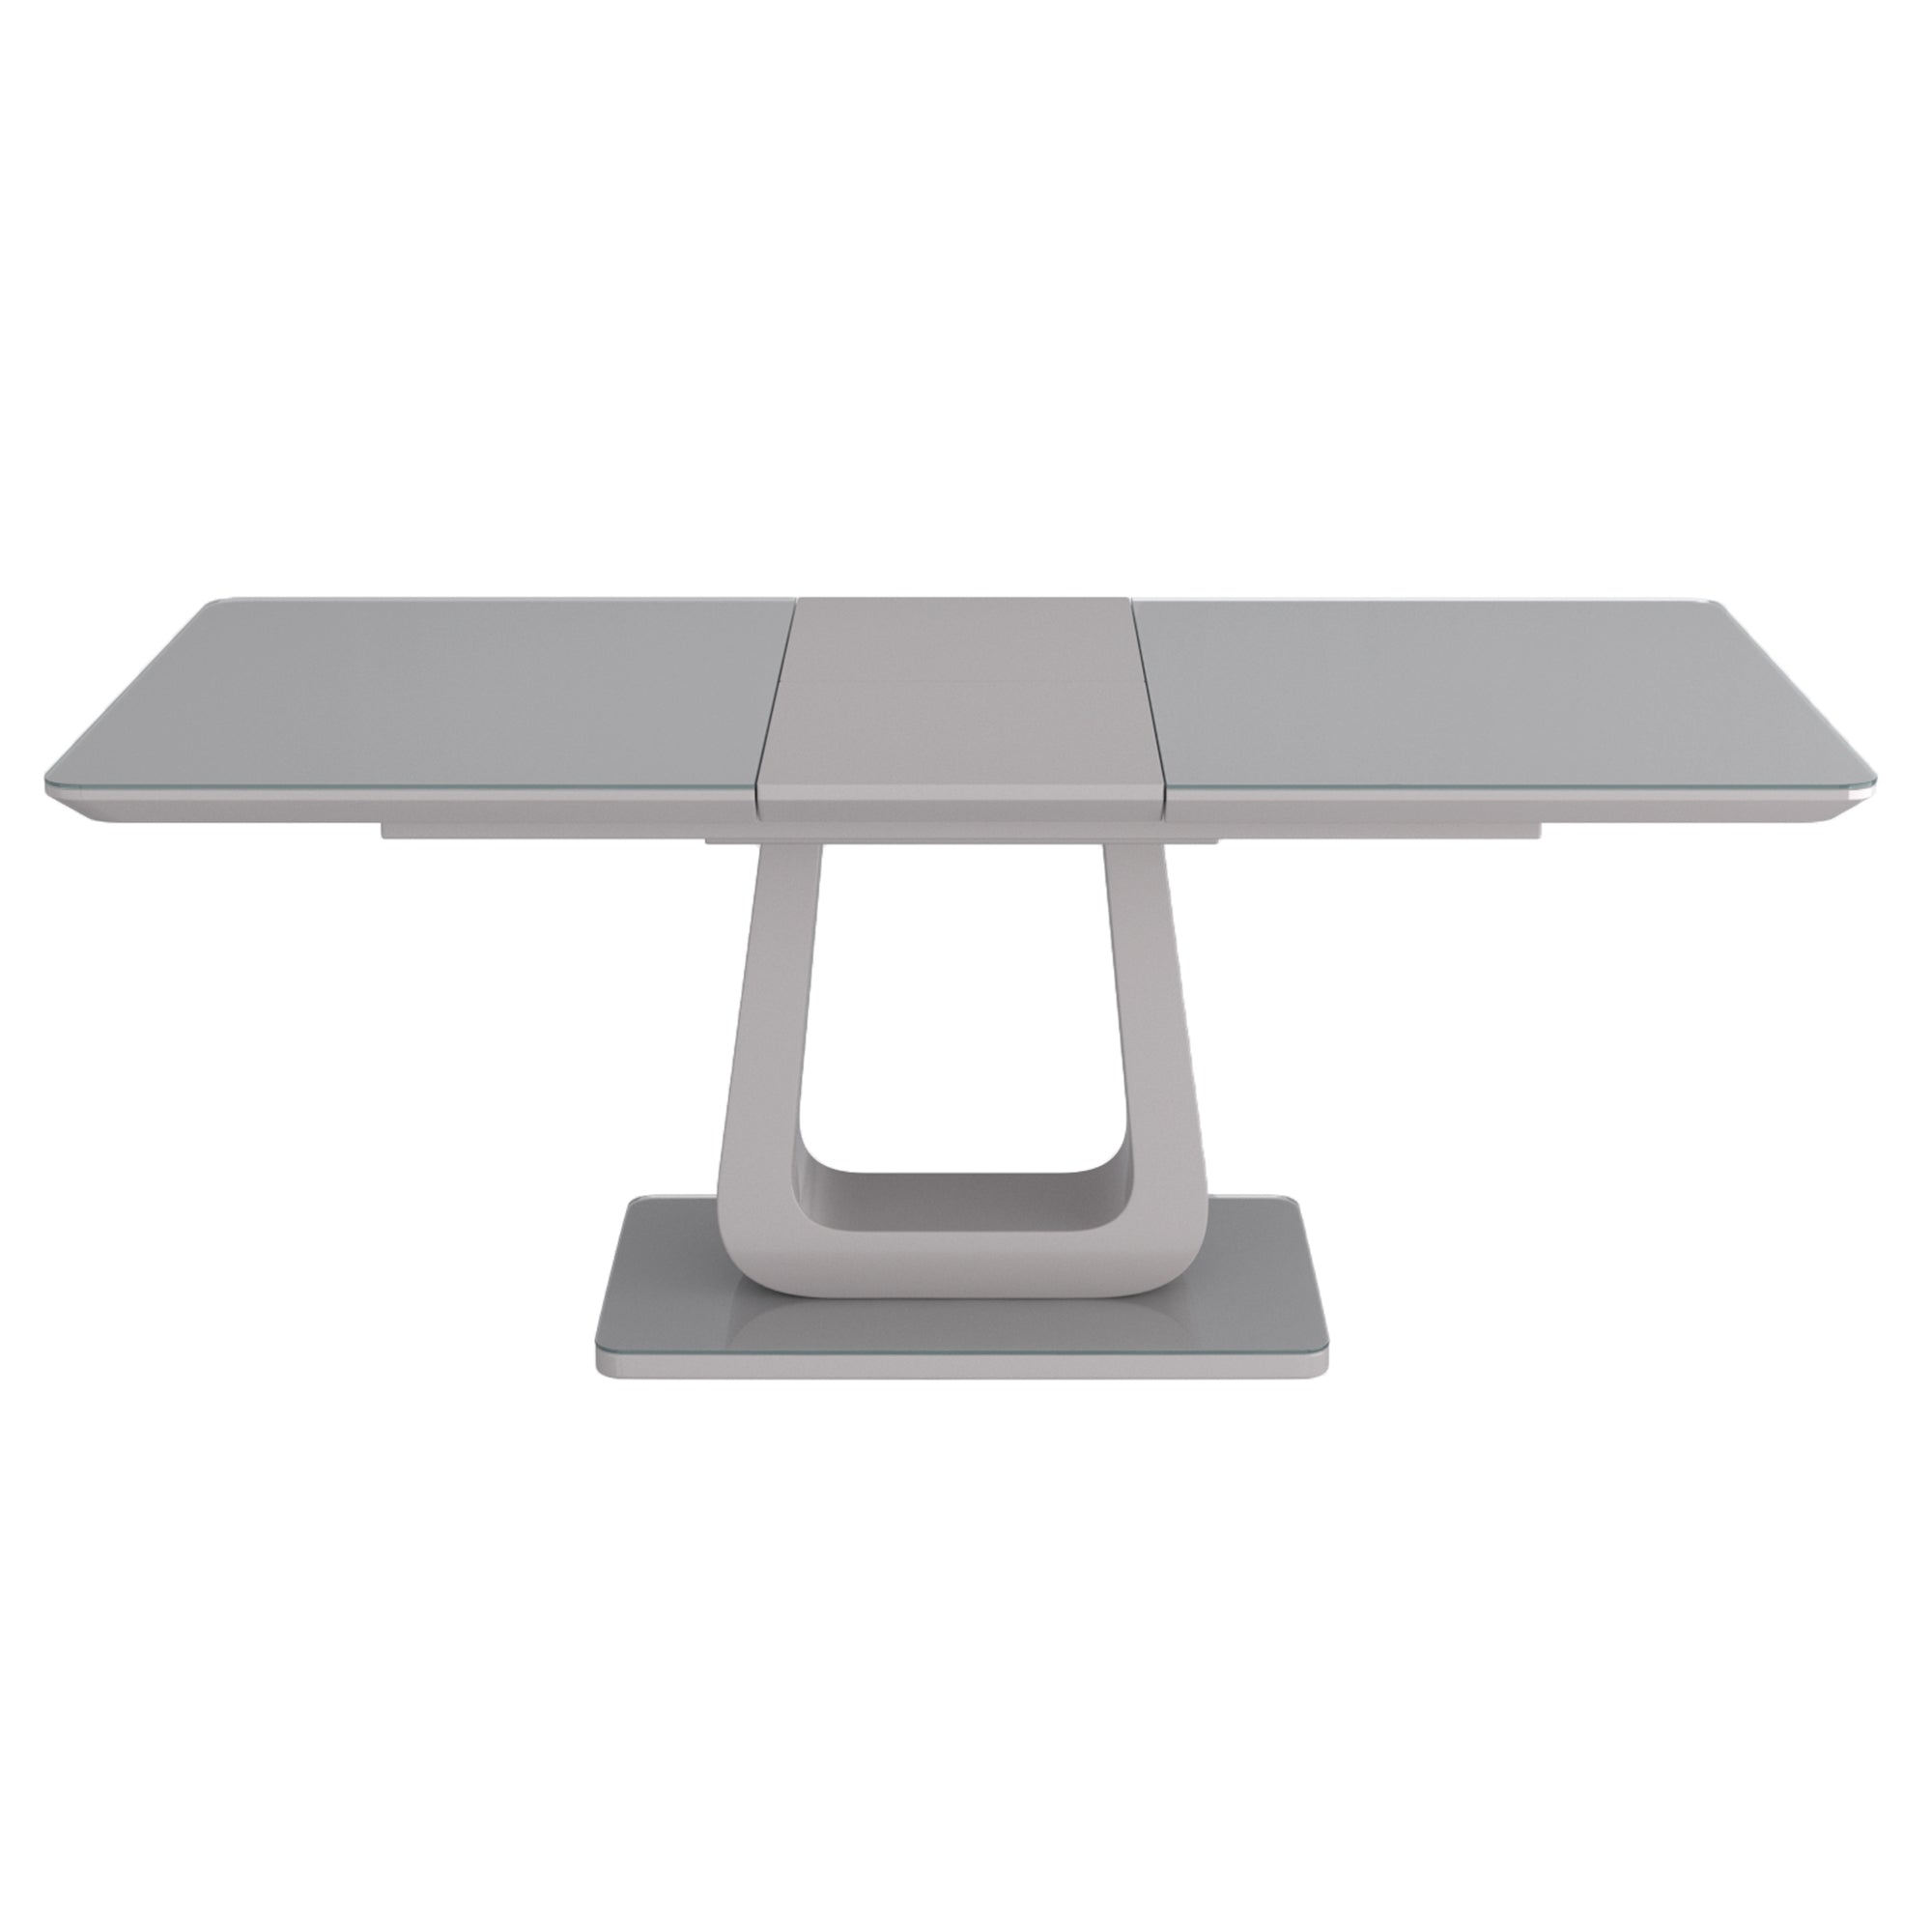 CORVUS-EXTENSION DINING TABLE-WARM GREY